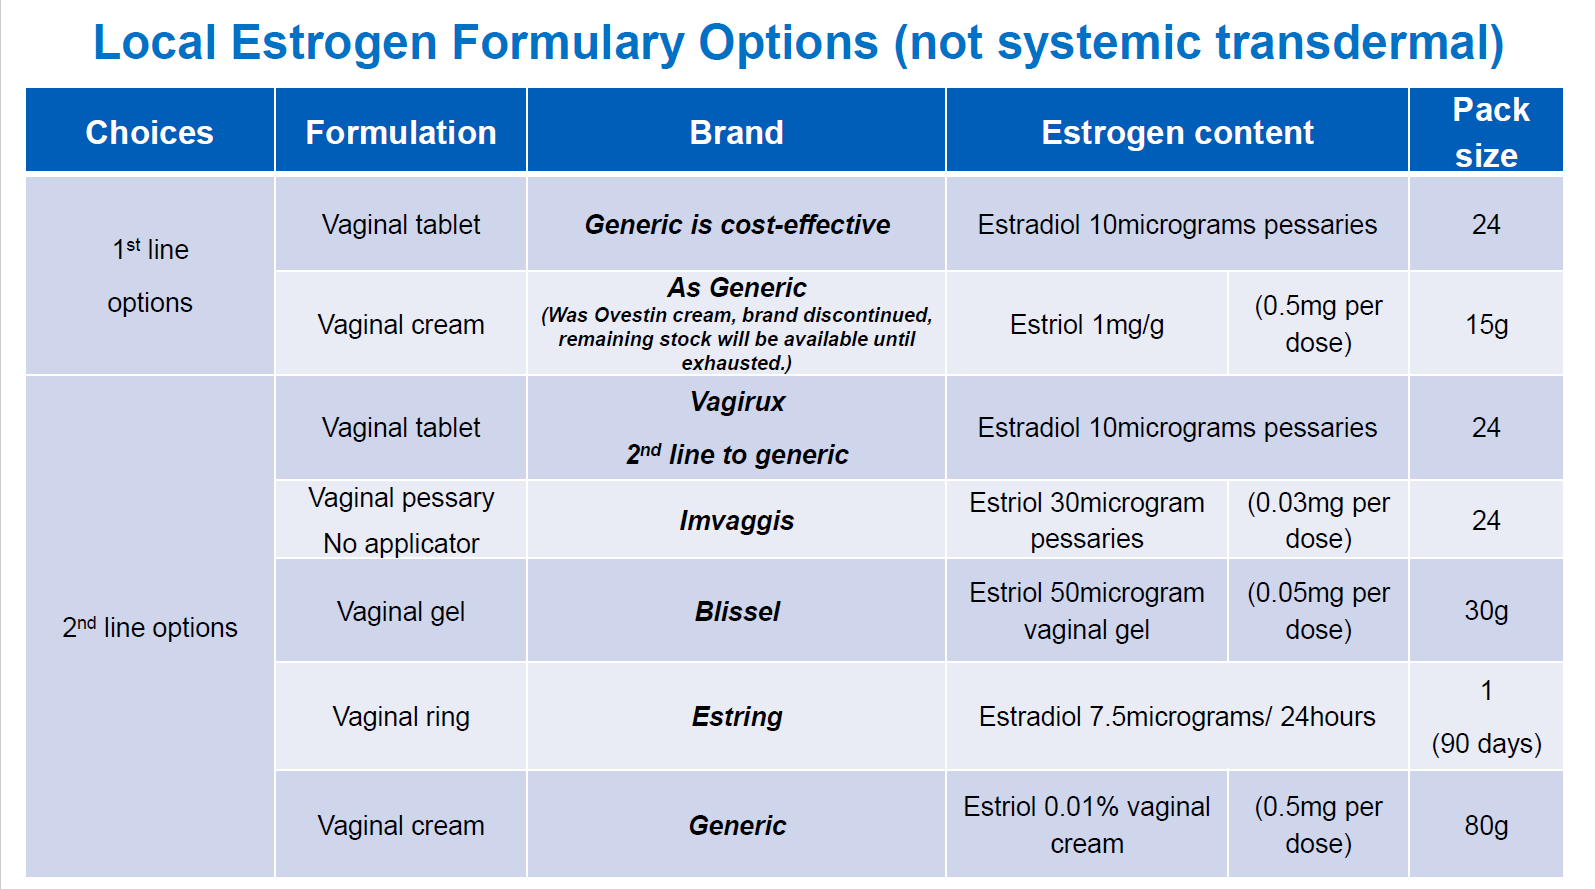 NHS Somerset Hormone Replacement Therapy Local Estrogen Options Table